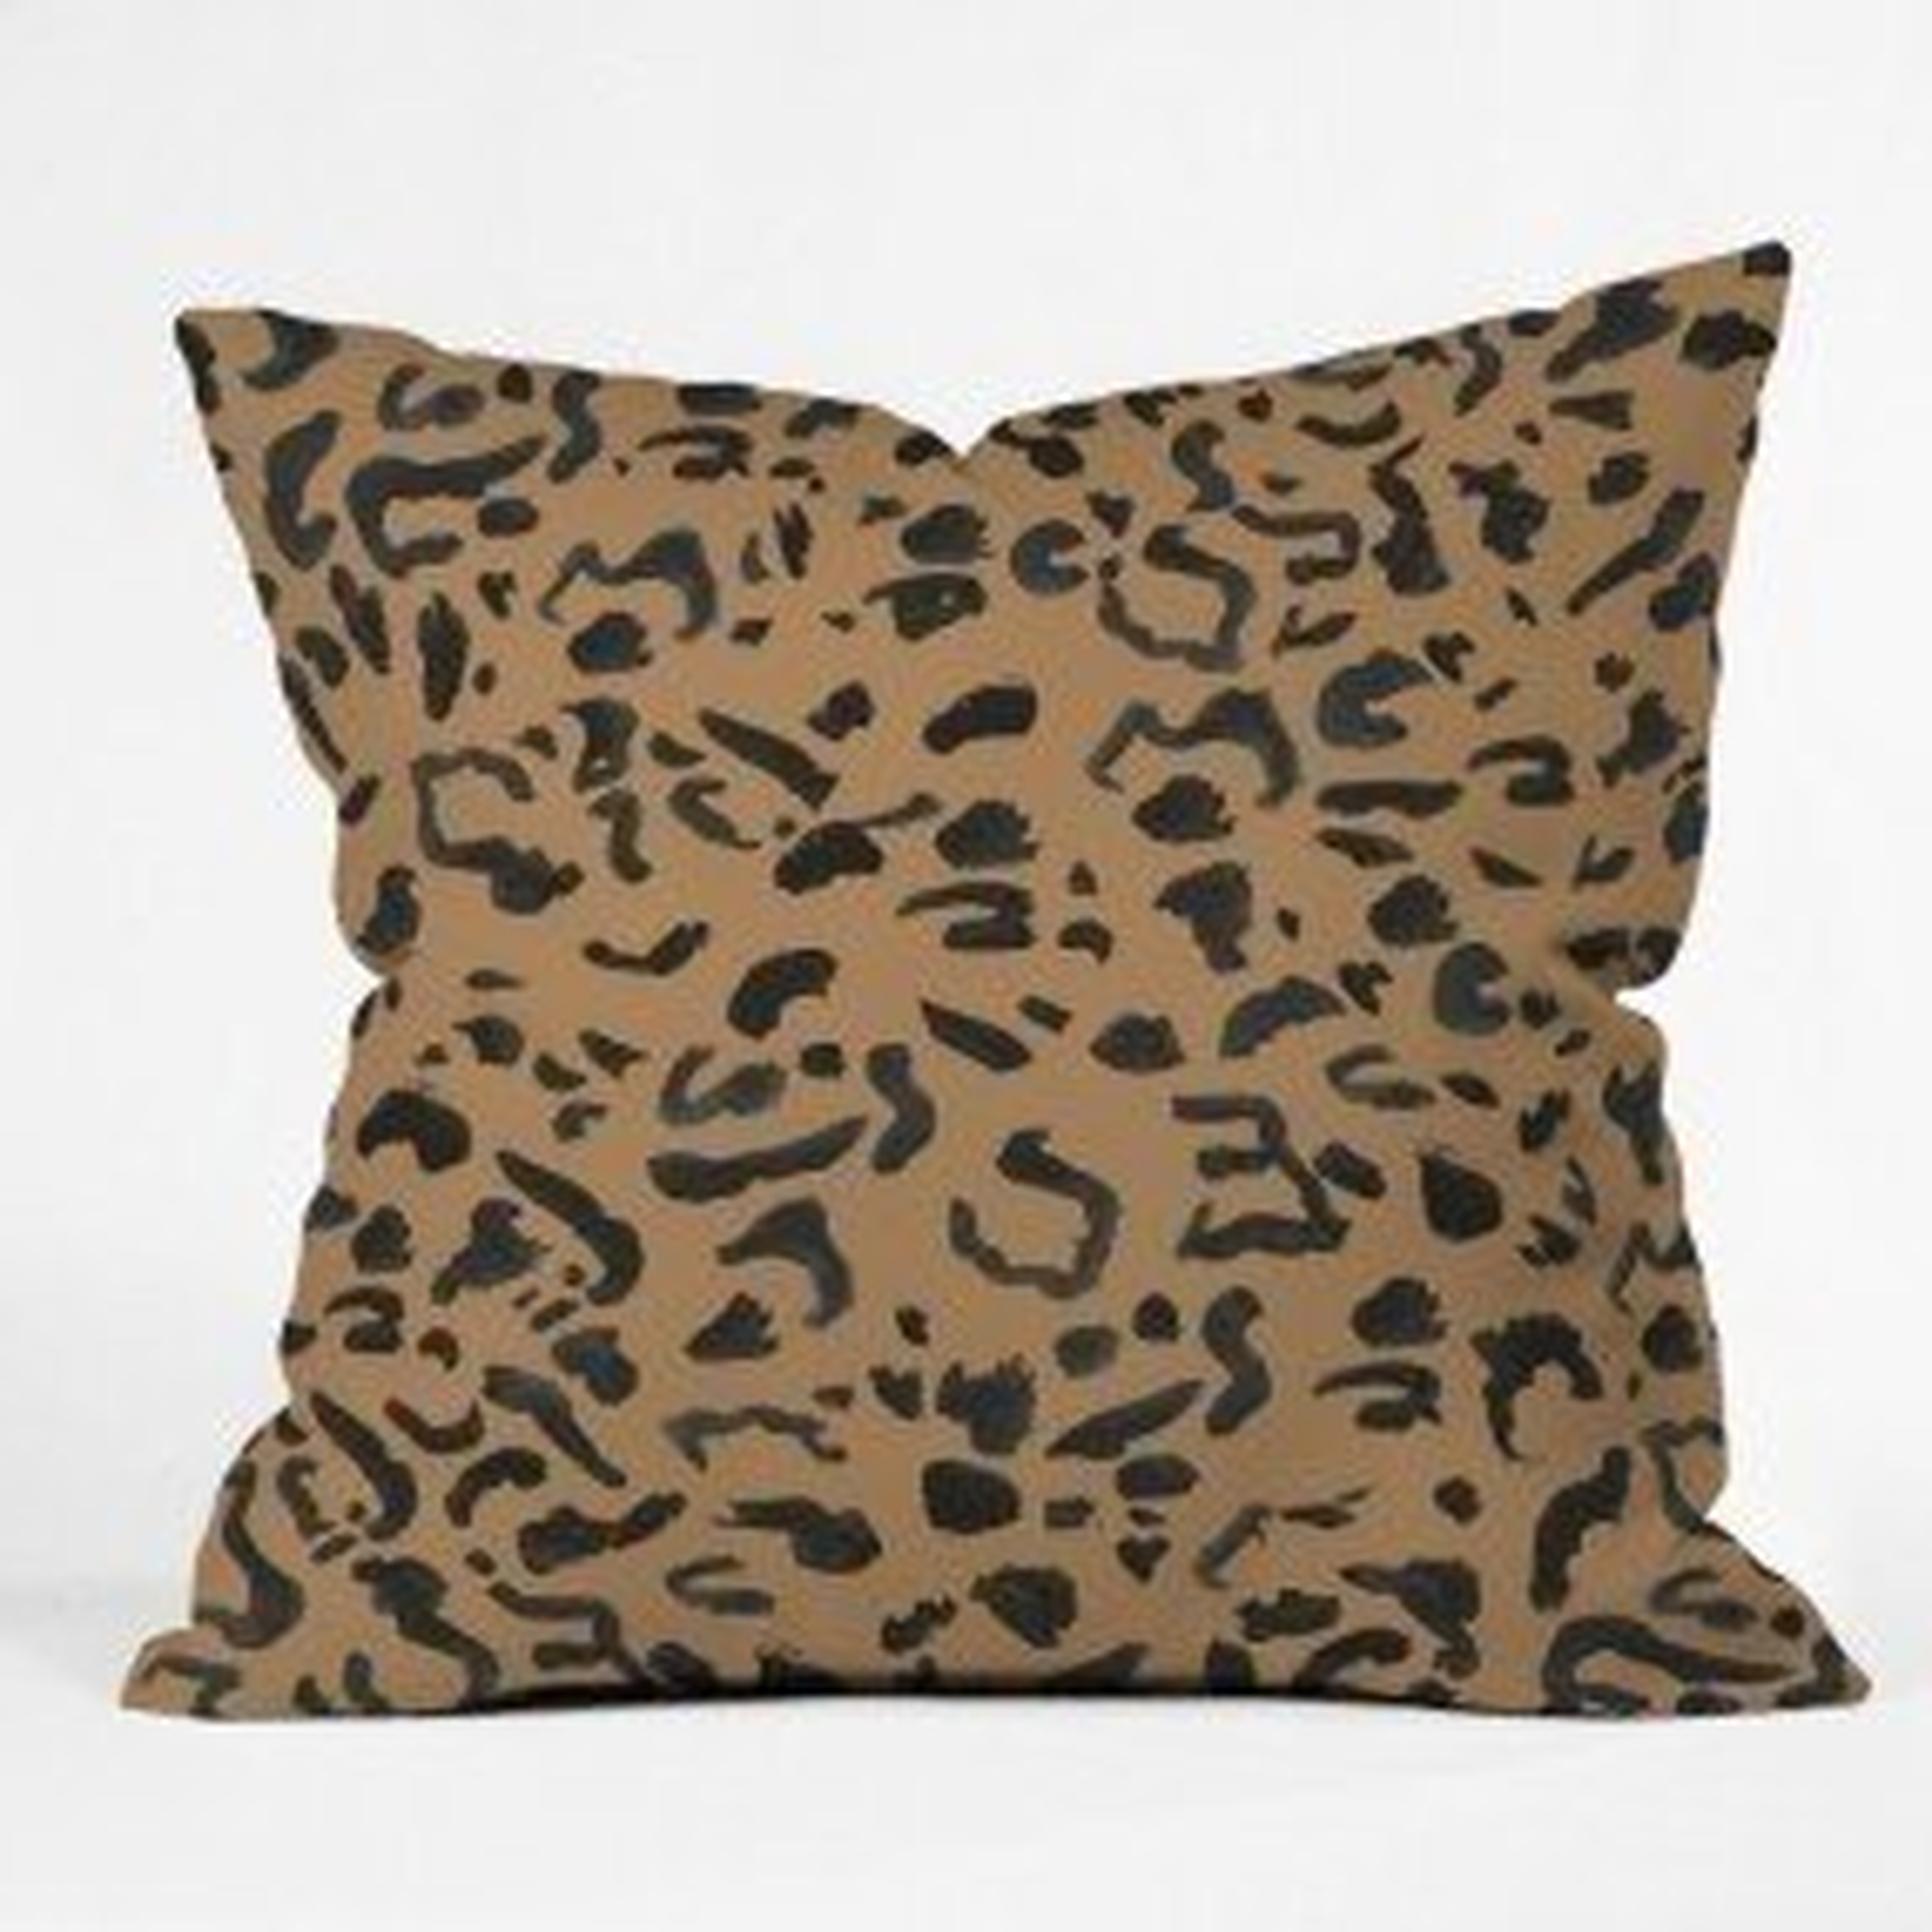 CHEETAH PRINT-18x18 Pillow Cover with insert - Wander Print Co.